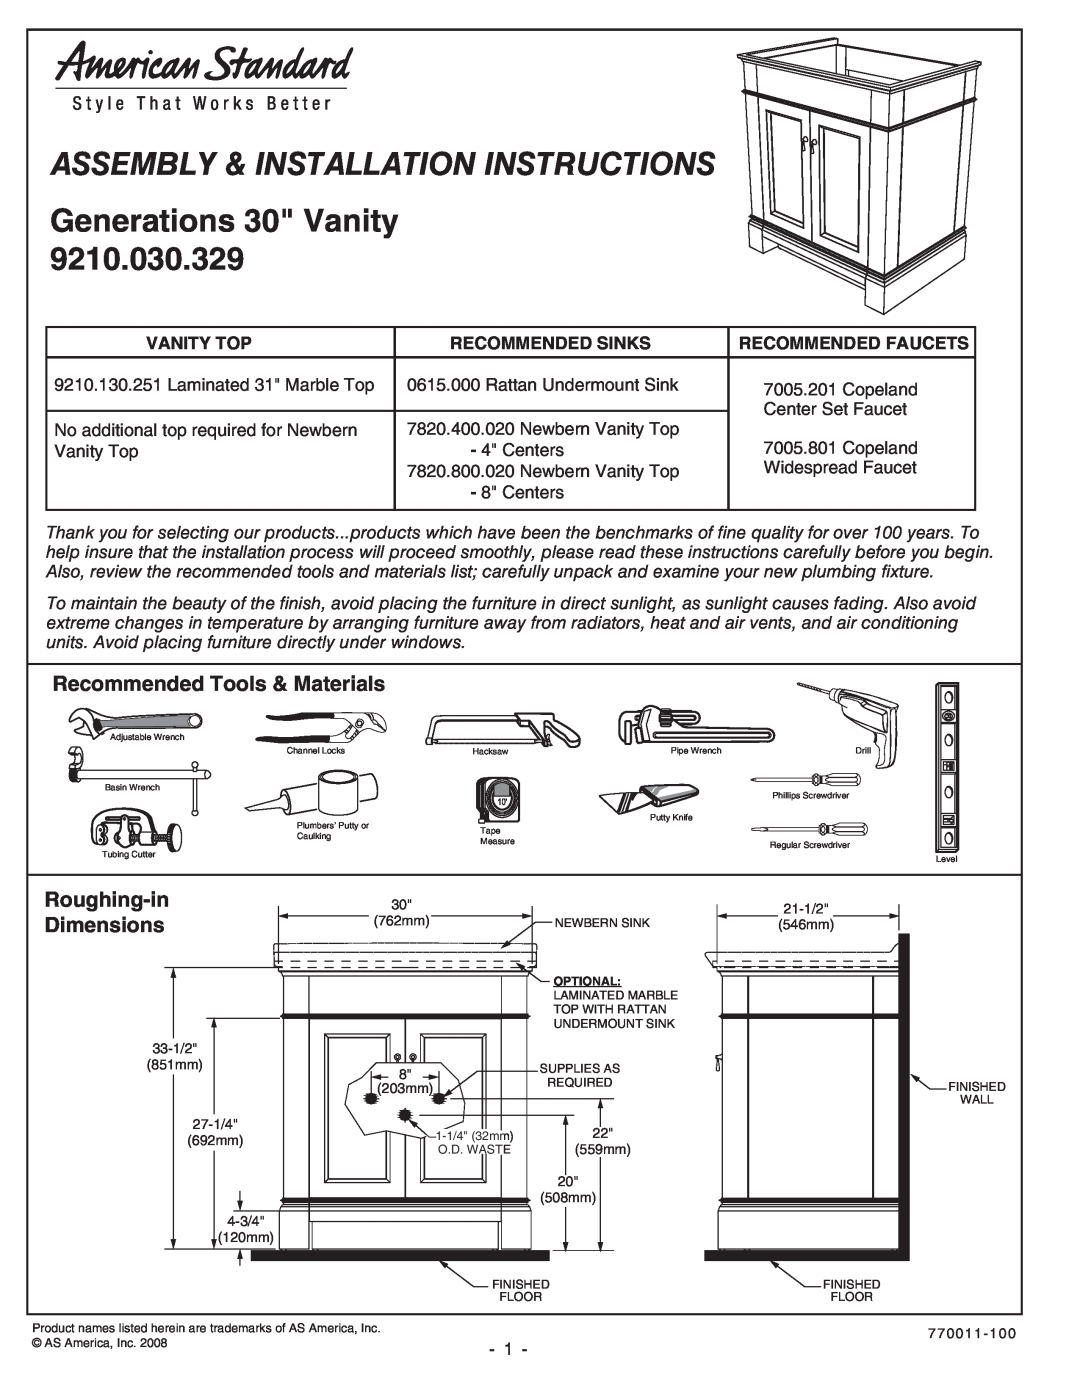 American Standard 9210.030.329 installation instructions Recommended Tools & Materials, Roughing-in, Dimensions 